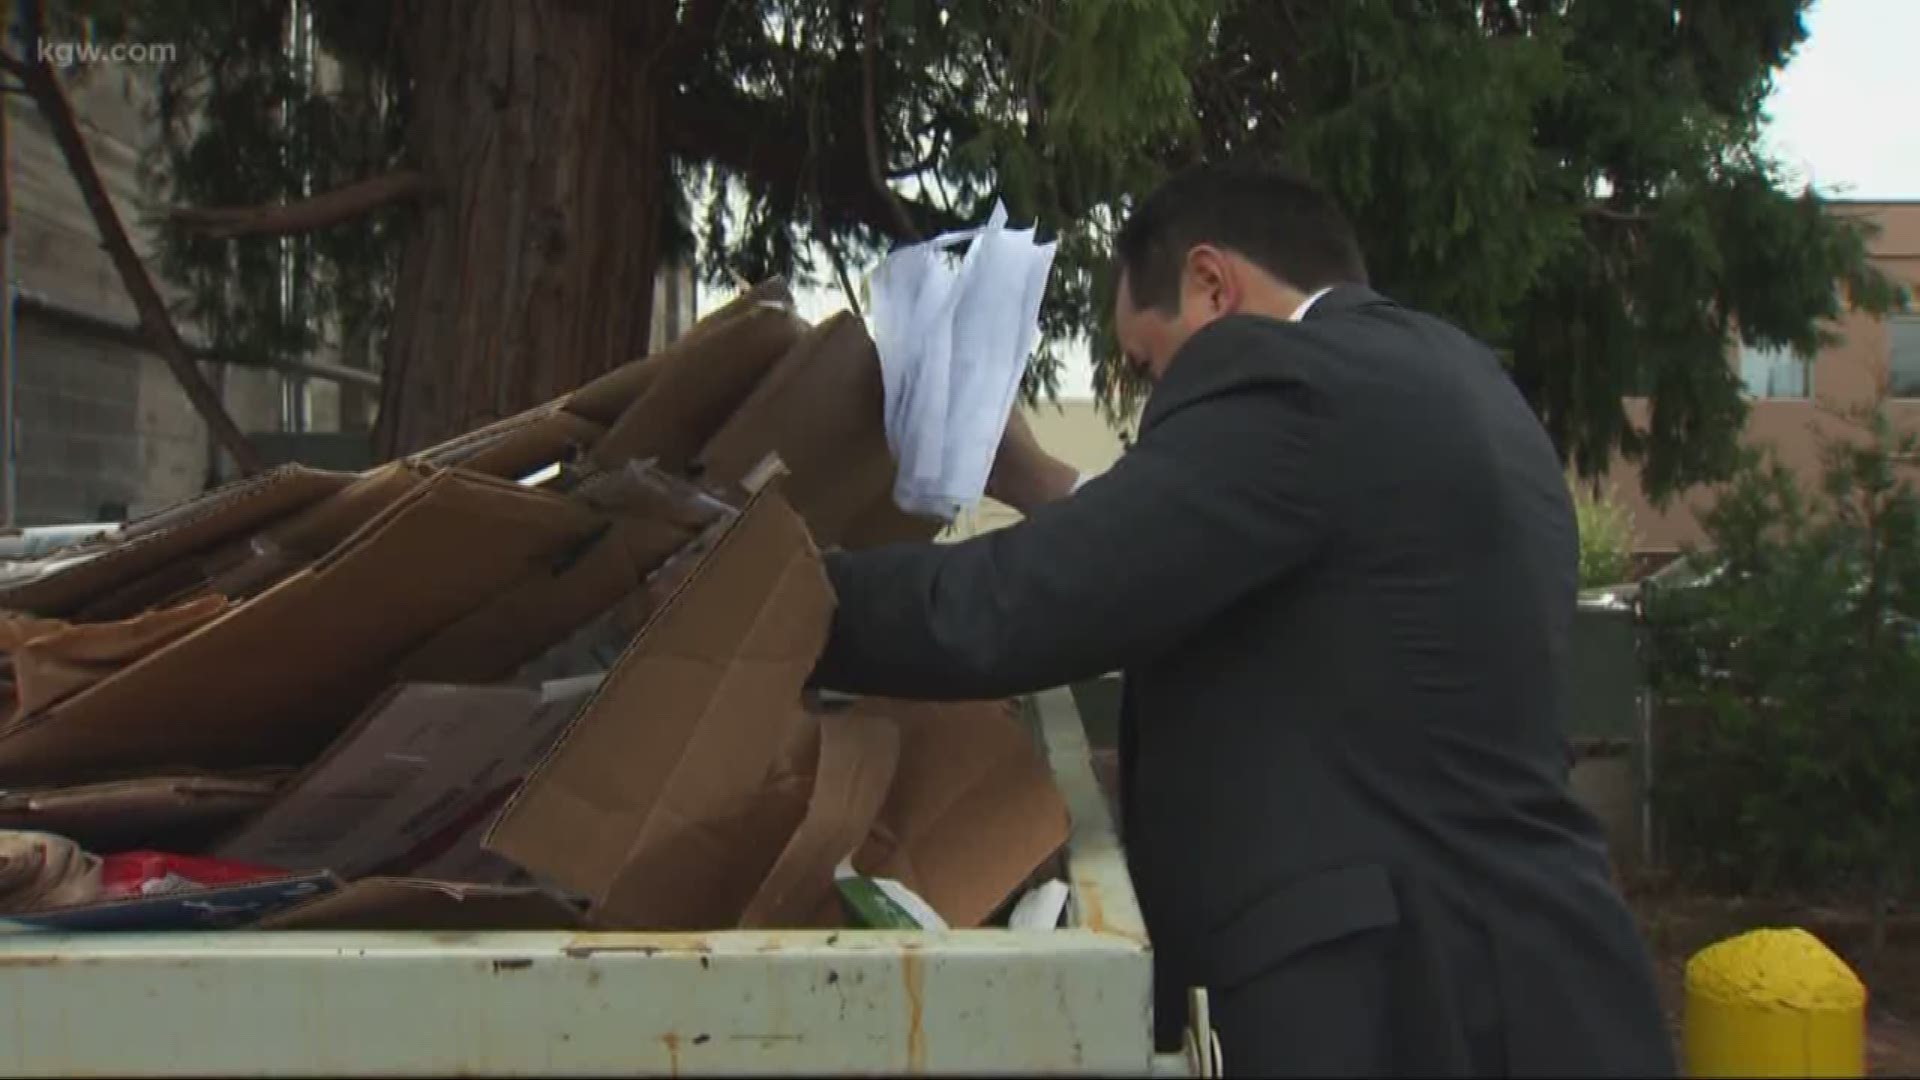 Some confidential legal papers ended up in a dumpster.